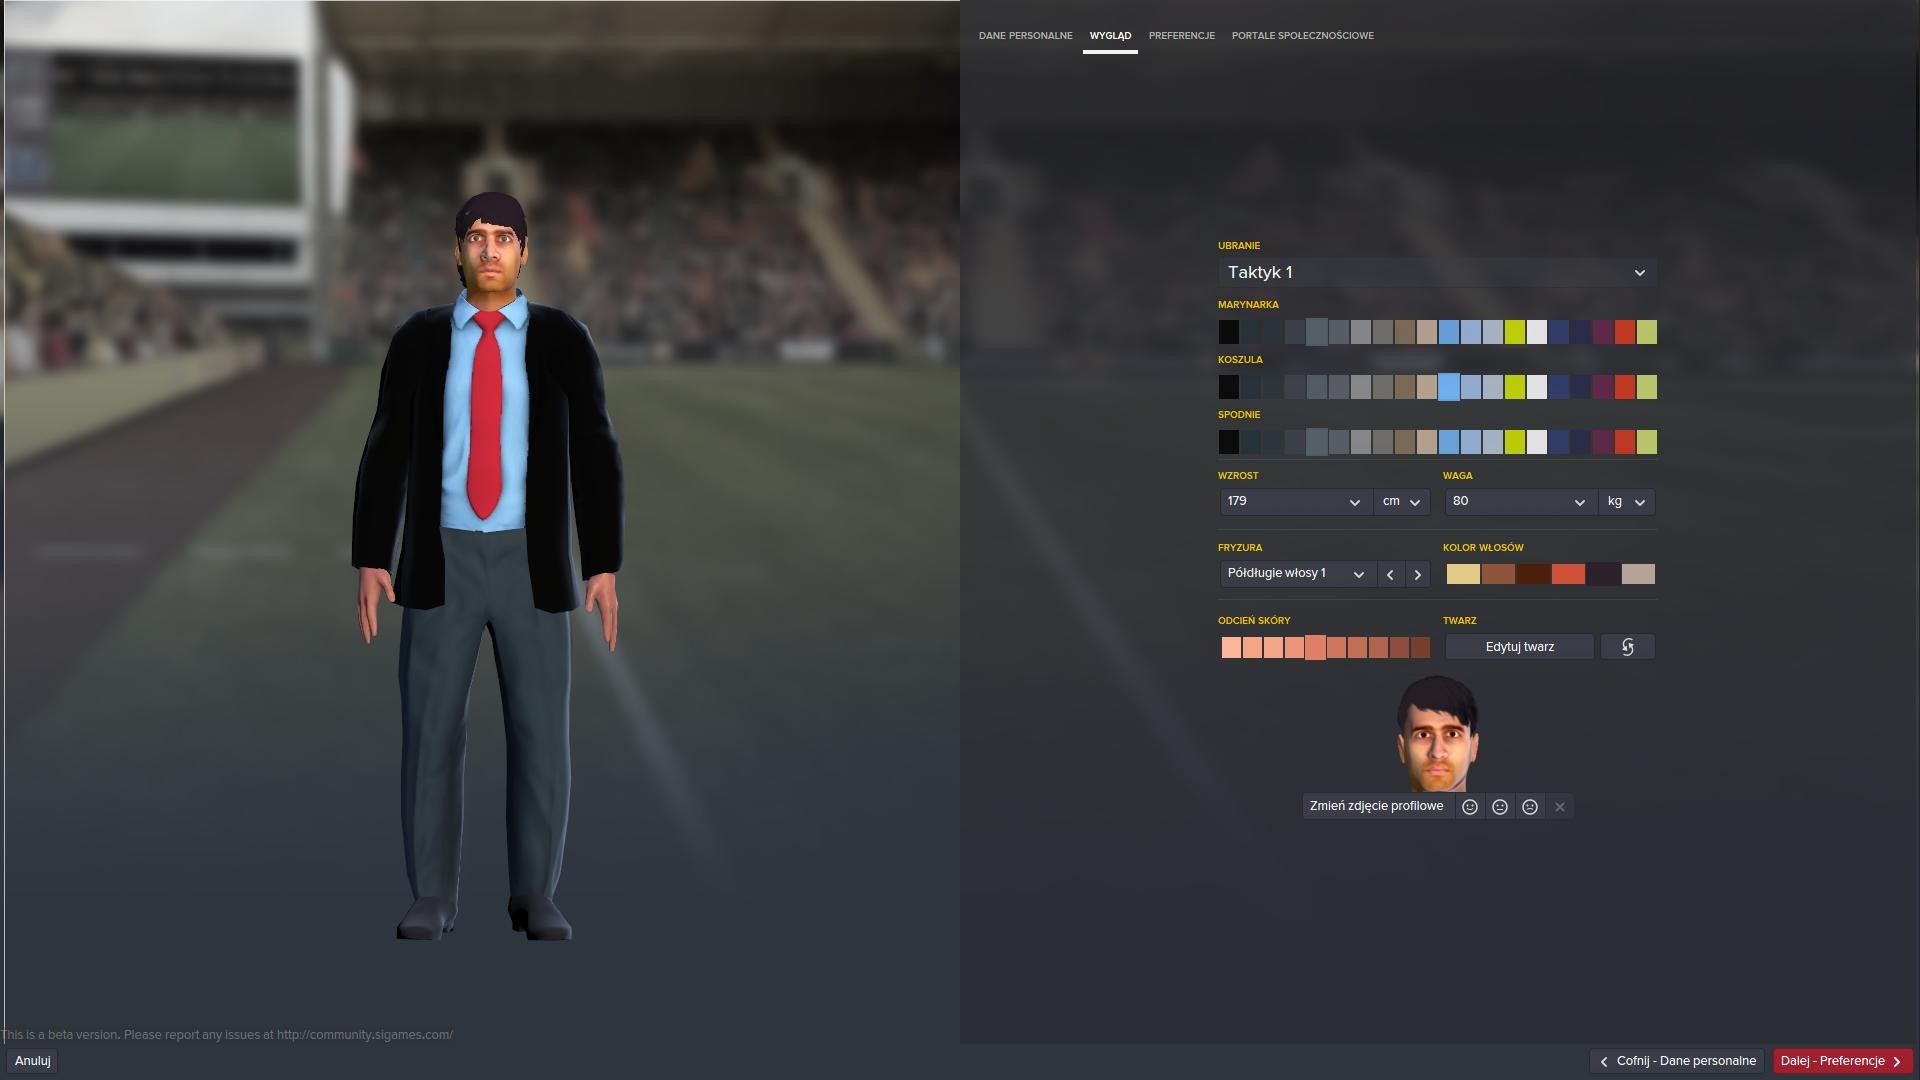 download football manager 2016 for free